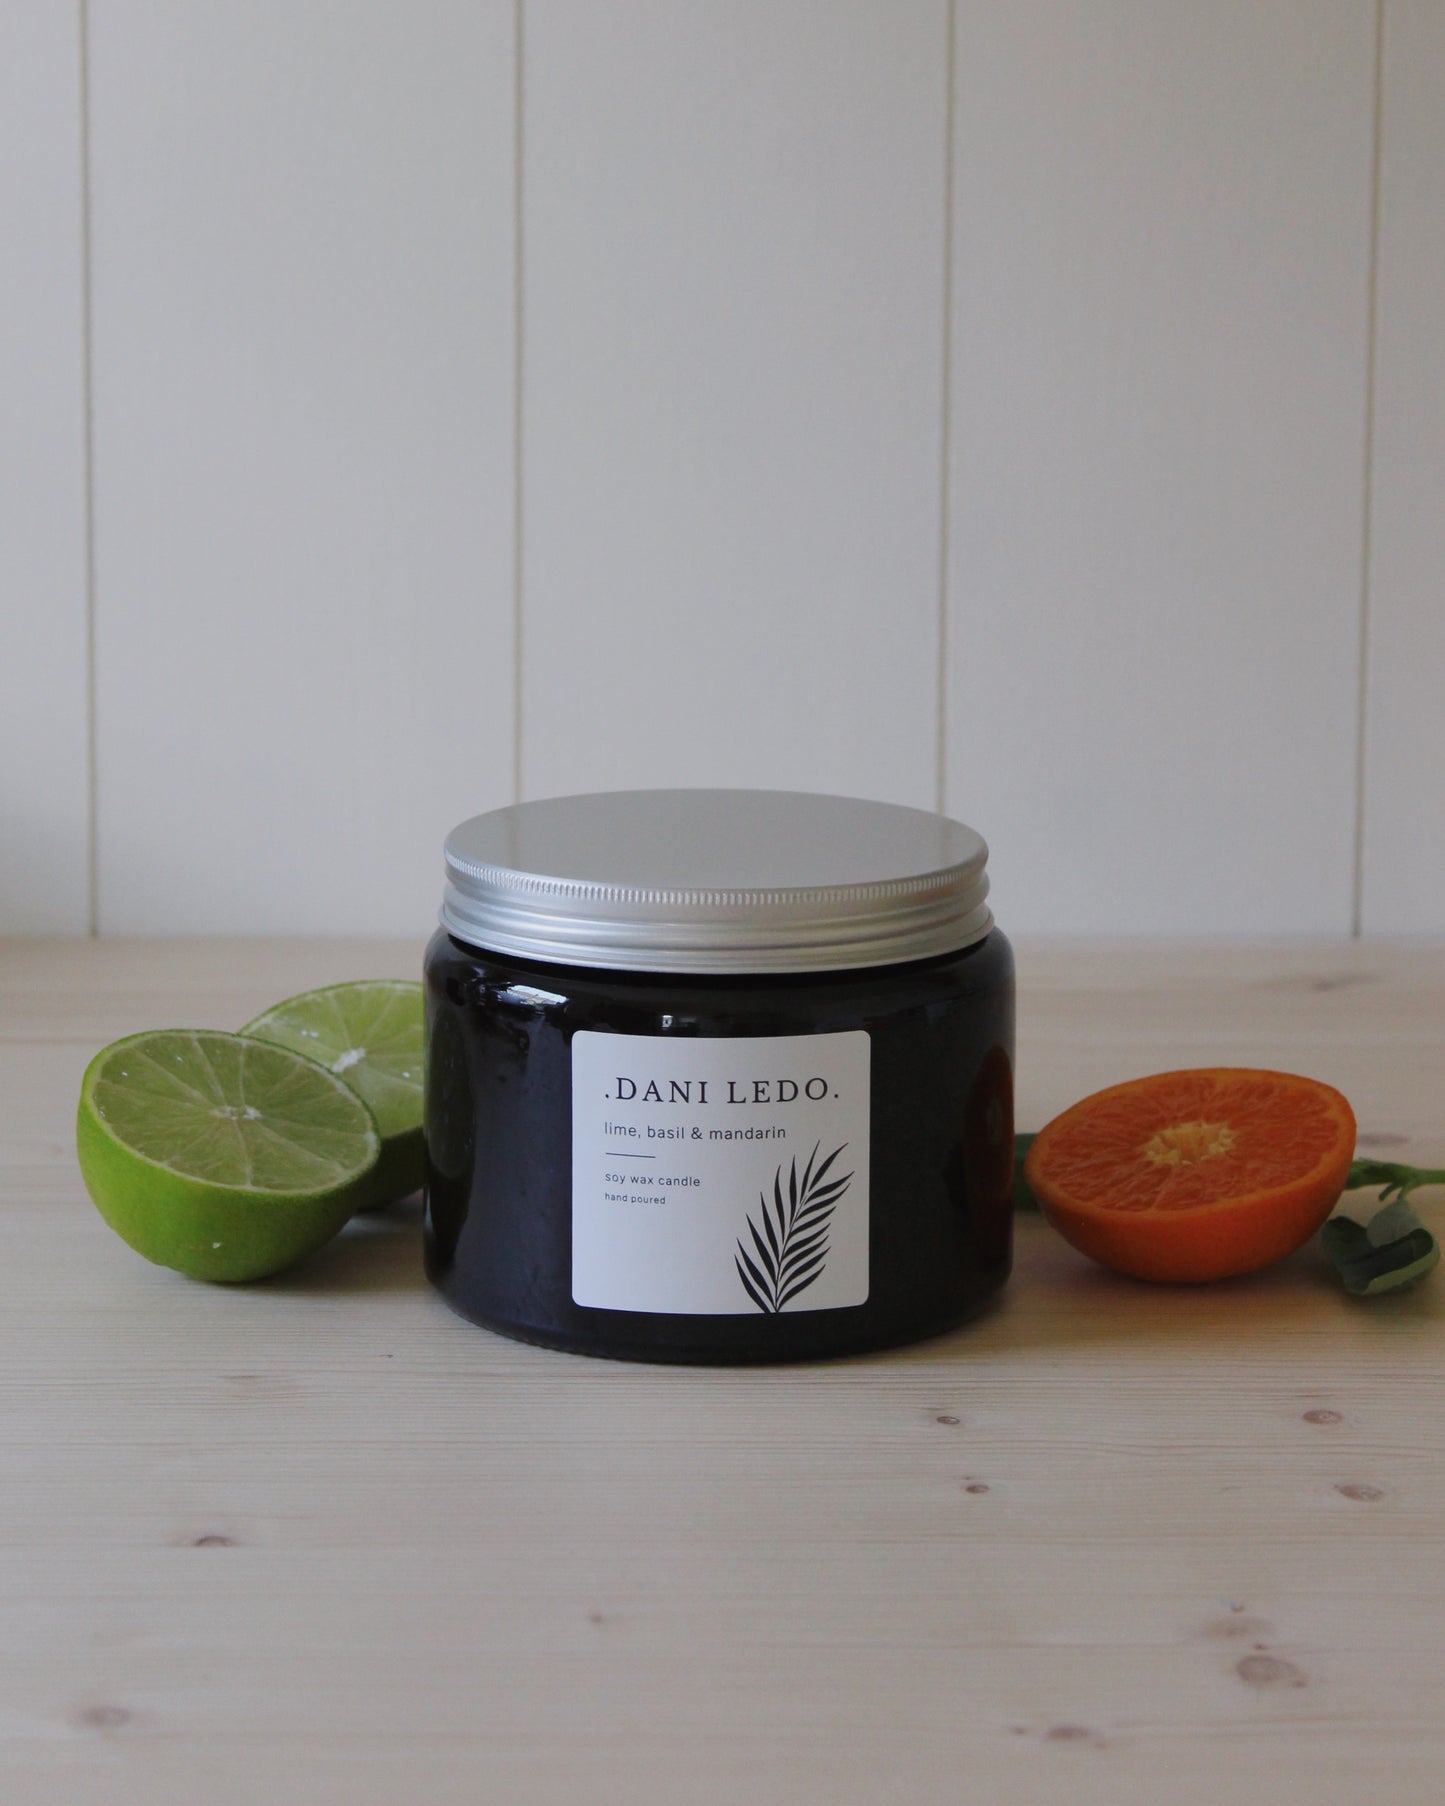 Lime, Basil & Mandarin Double Wick Candle